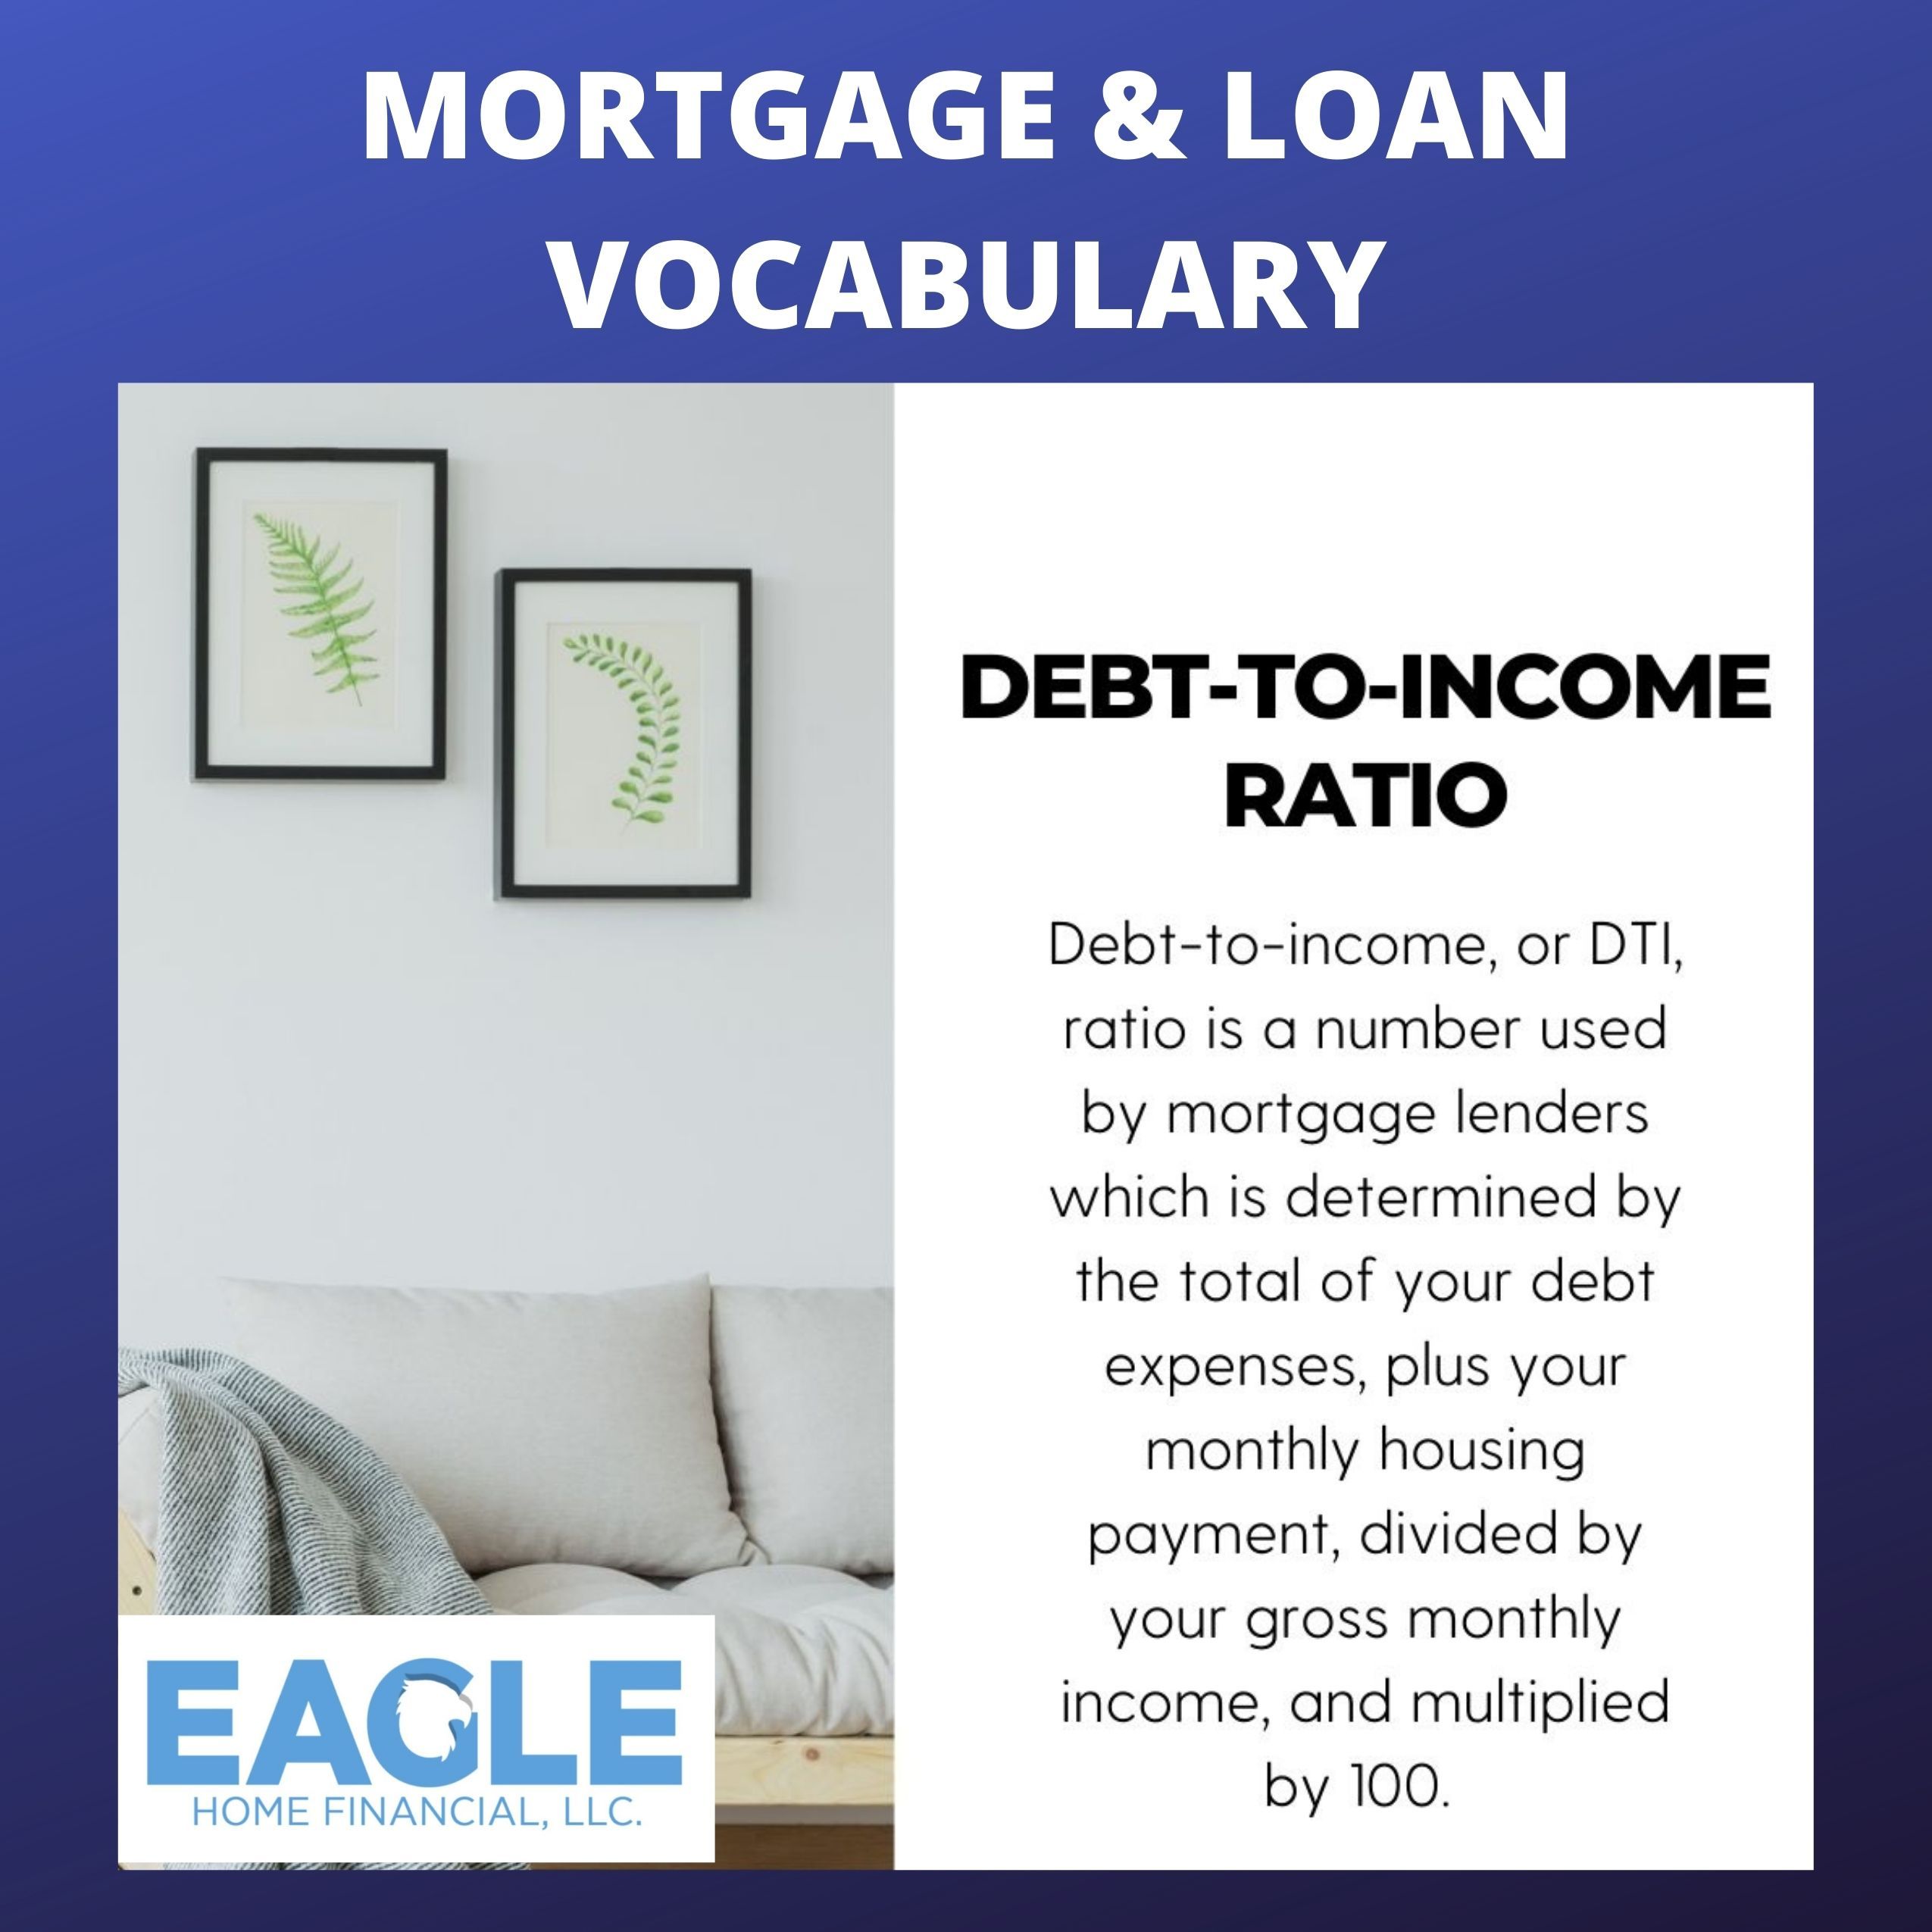 Mortgage &  Loan Vocabulary in 2021